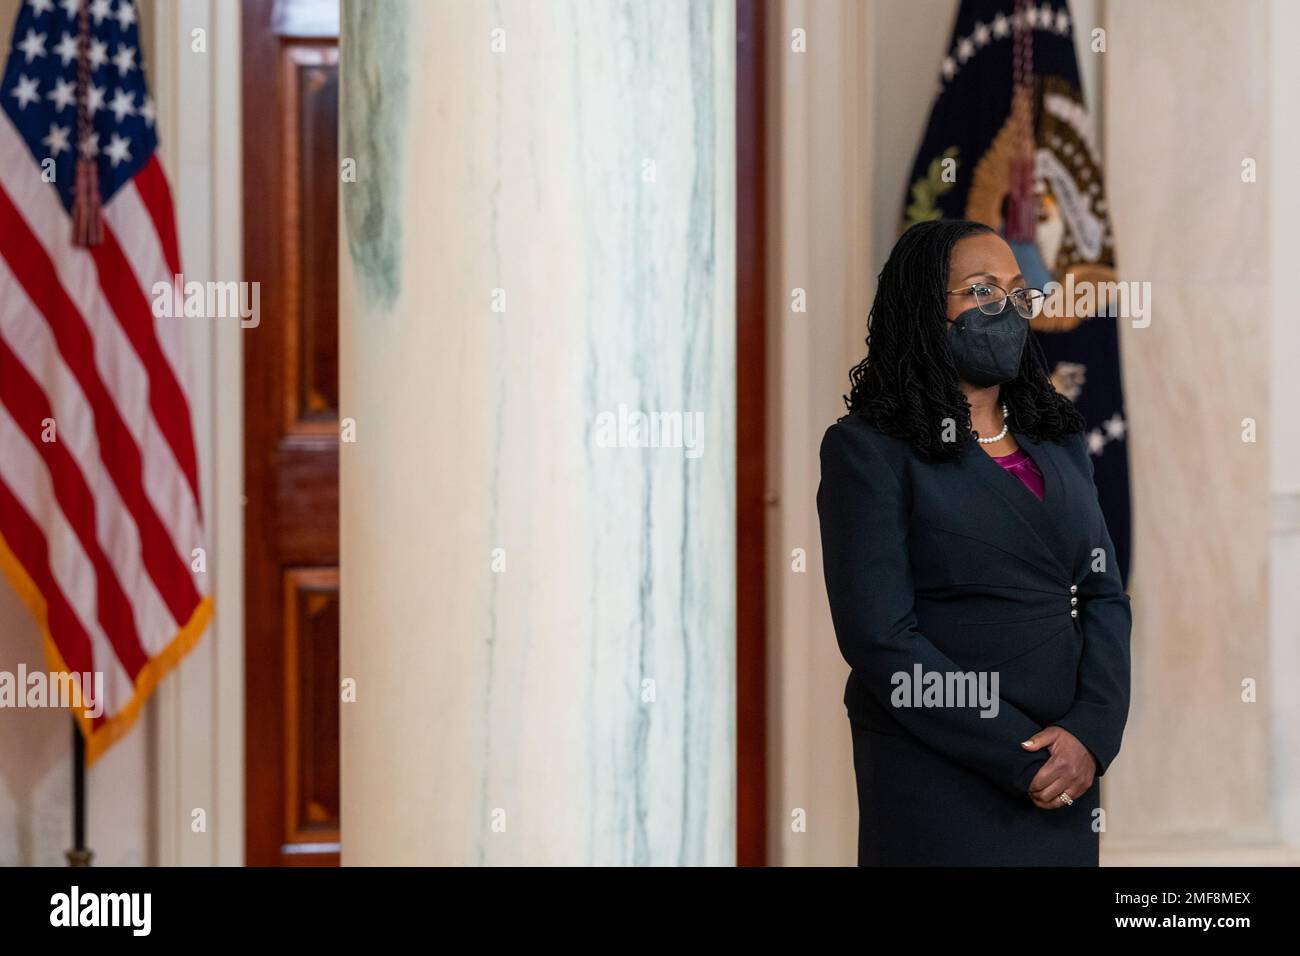 Reportage: Judge Ketanji Brown Jackson looks on as President Joe Biden announces her nomination to the U.S. Supreme Court, Friday, February 25, 2022, in the Grand Foyer of the White House Stock Photo